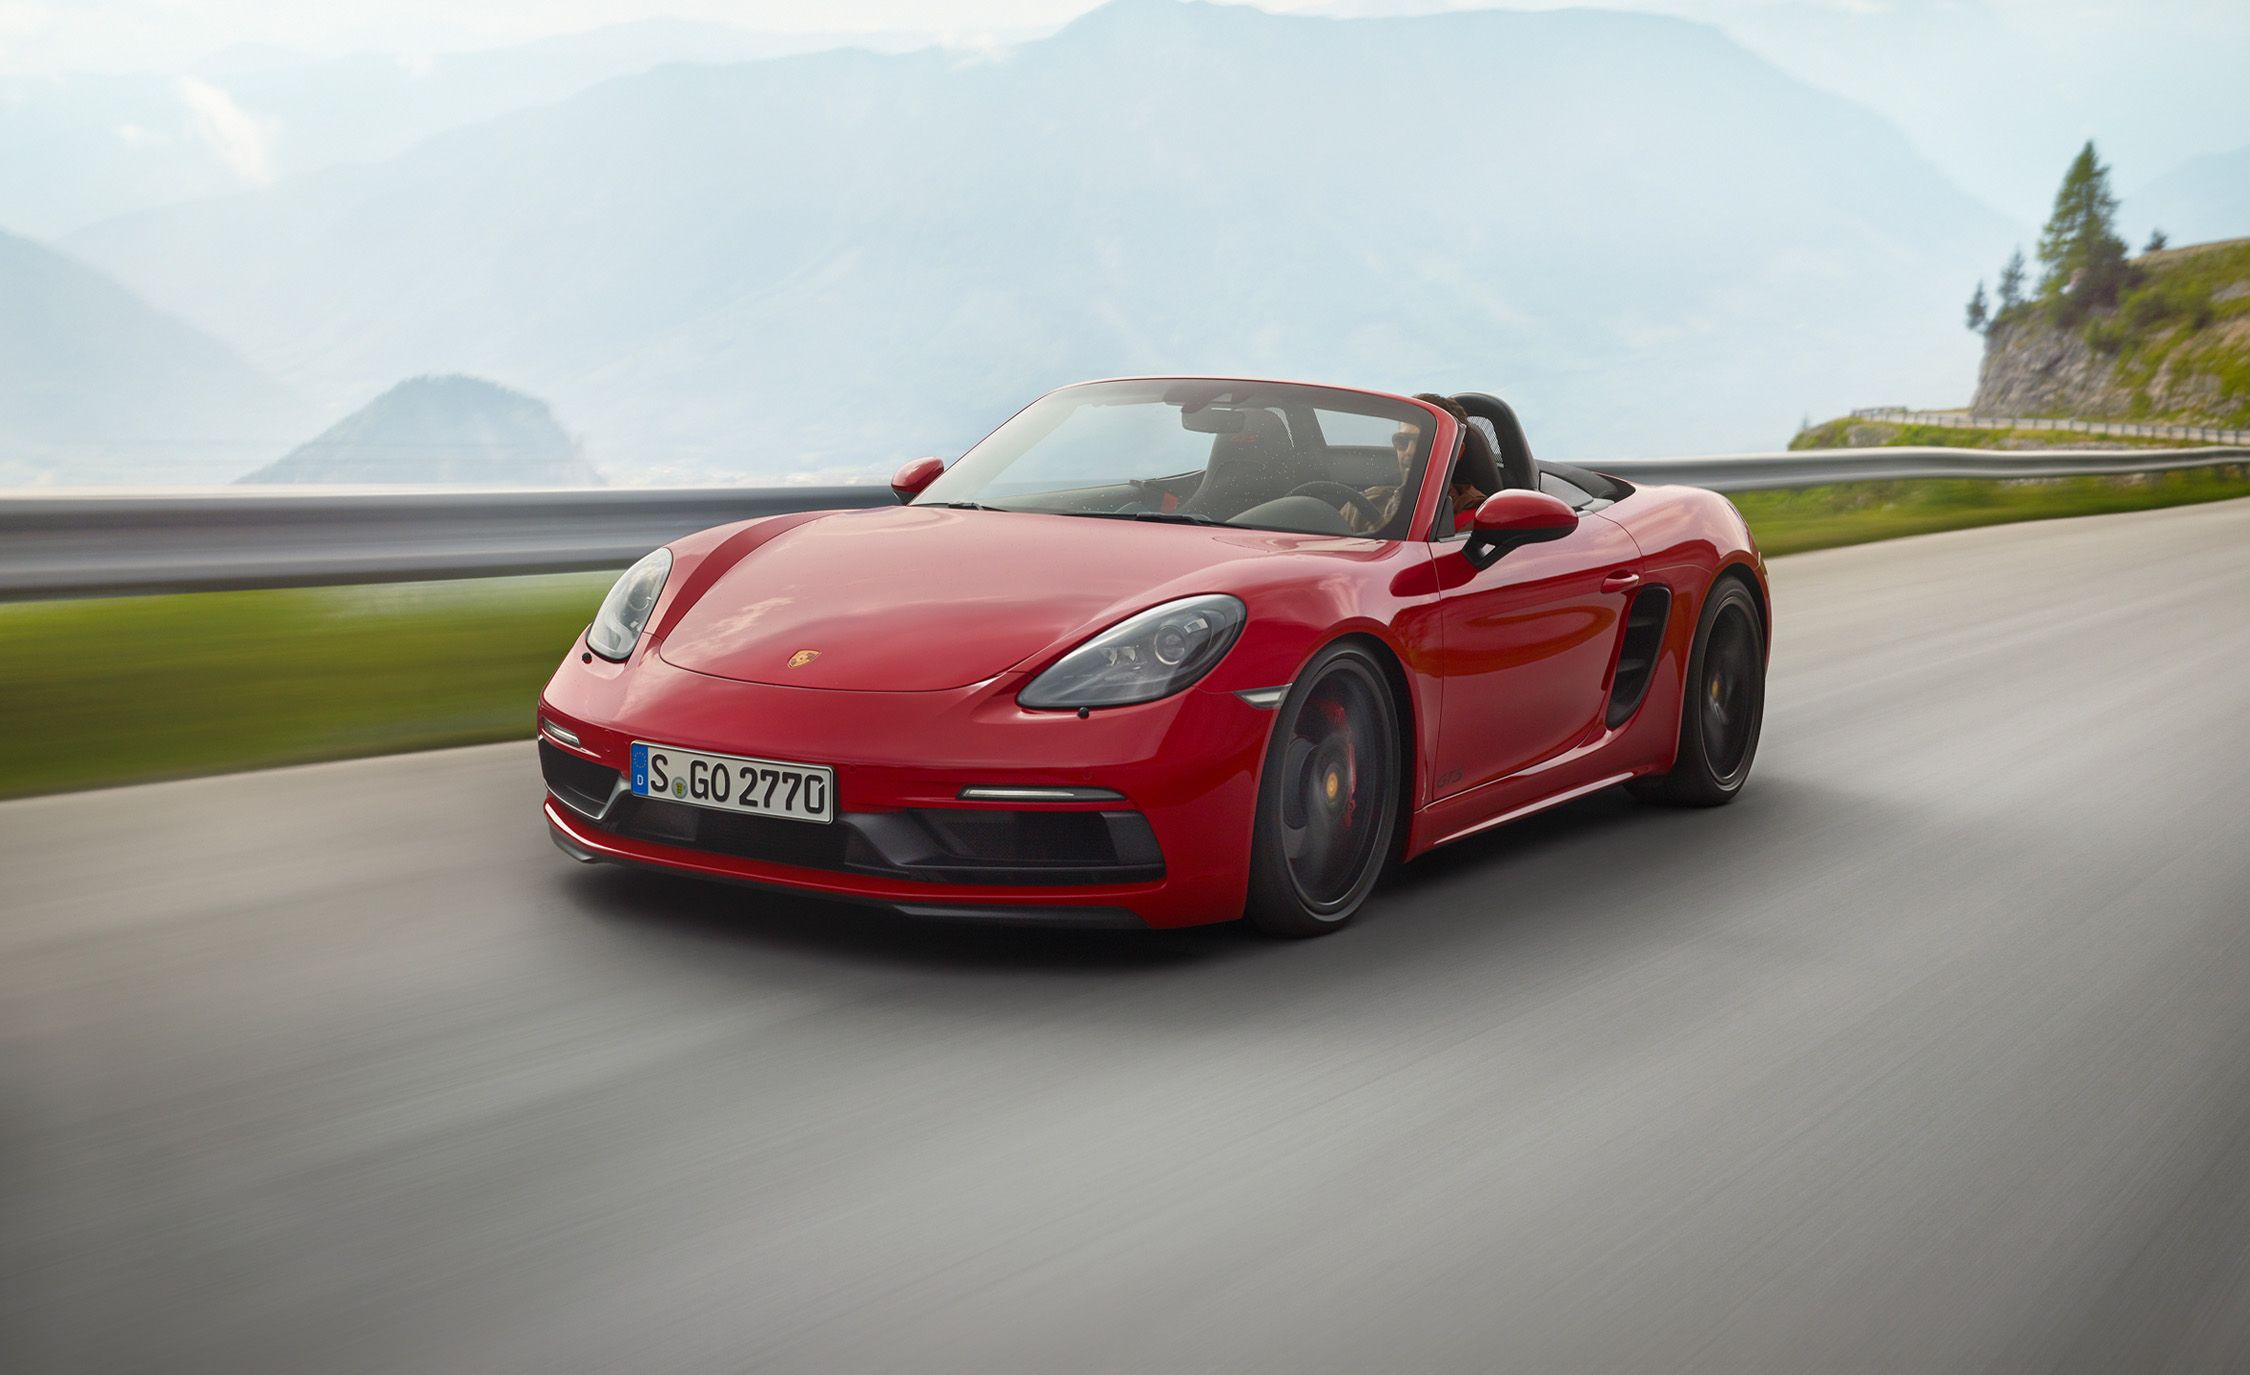 2018 Porsche 718 Boxster (red) - front